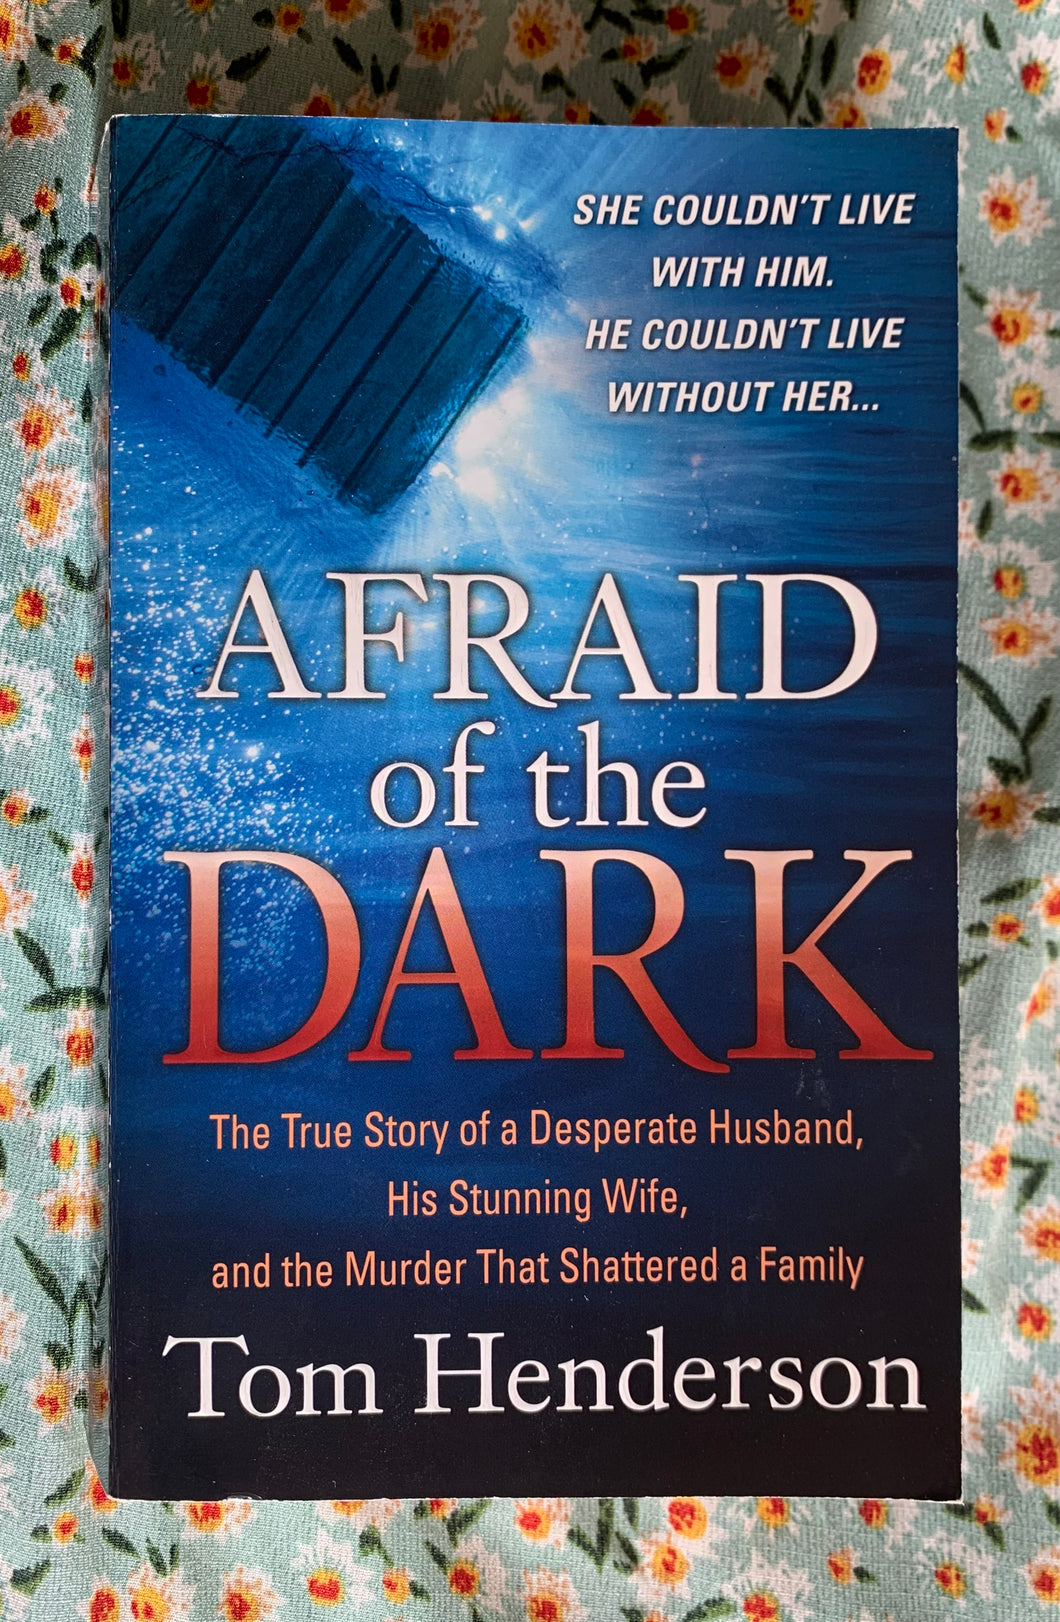 Afraid of the Dark: The True Story of a Desperate Husband, His Stunning Wife, and the Murder That Shattered a Family